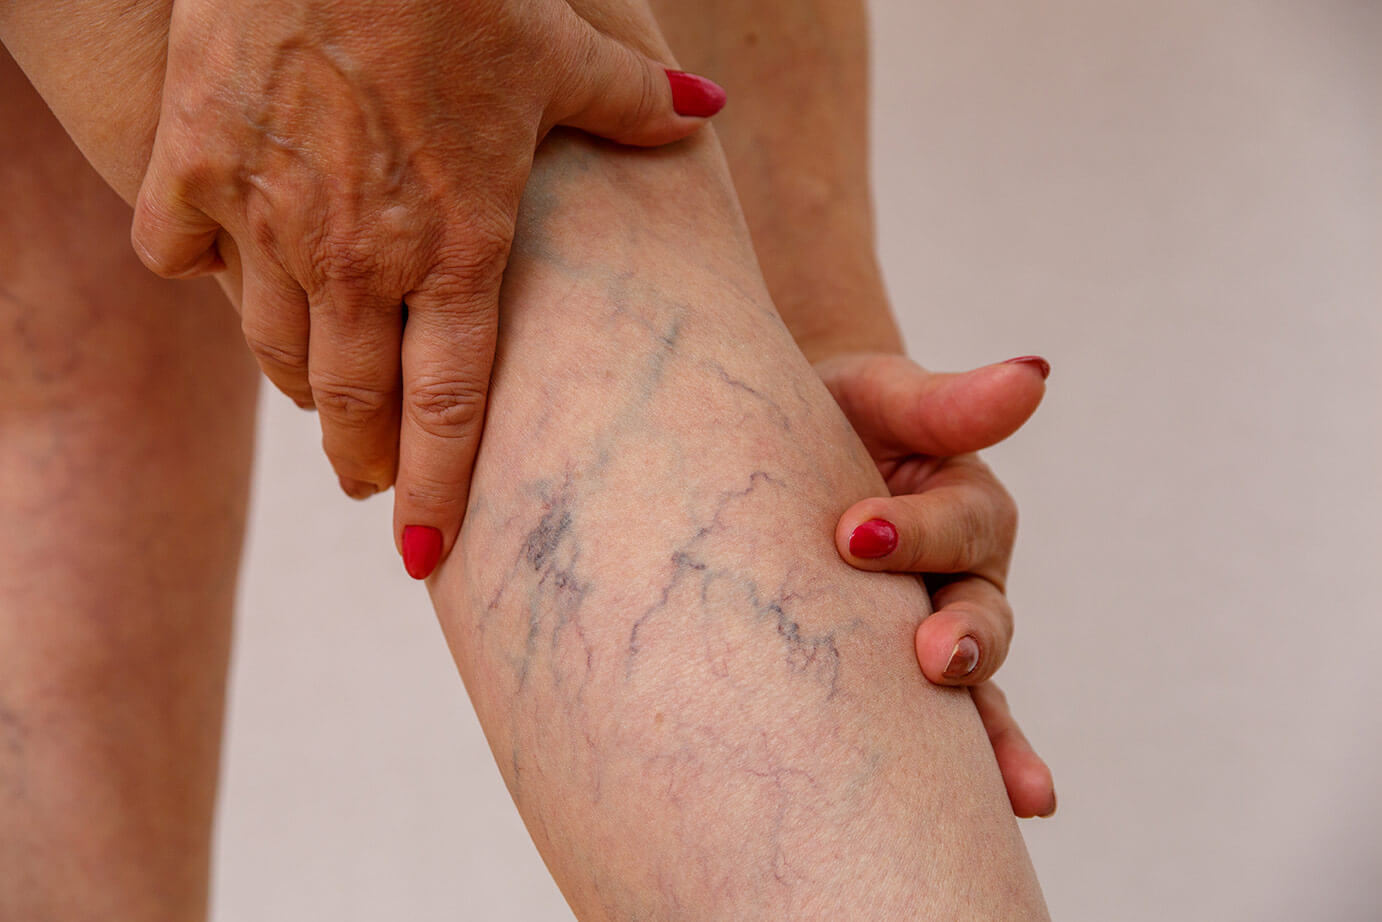 A closeup image of an elderly woman holding her calf and examining spider and varicose veins.